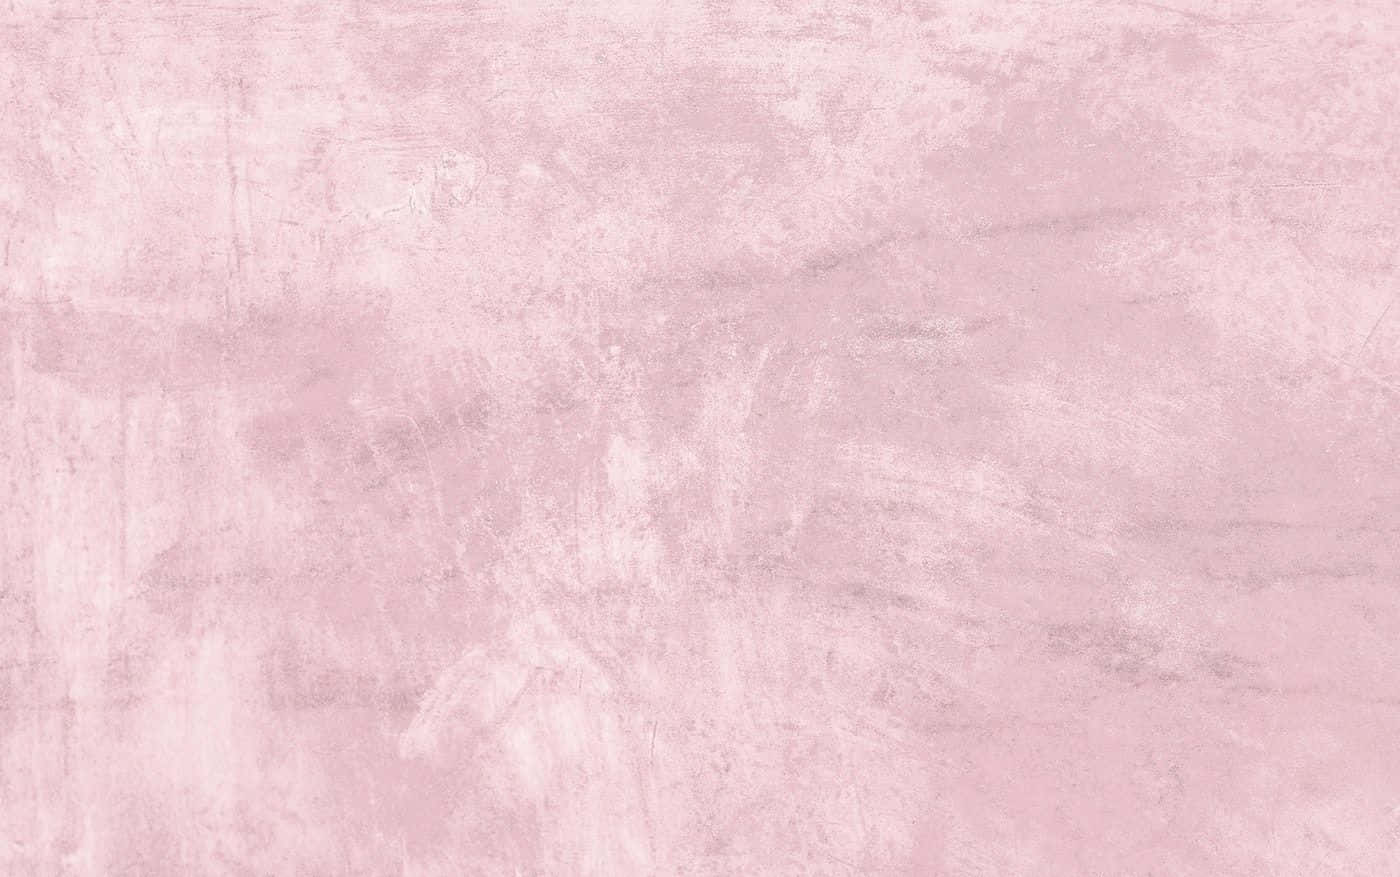 A delicate pink texture background